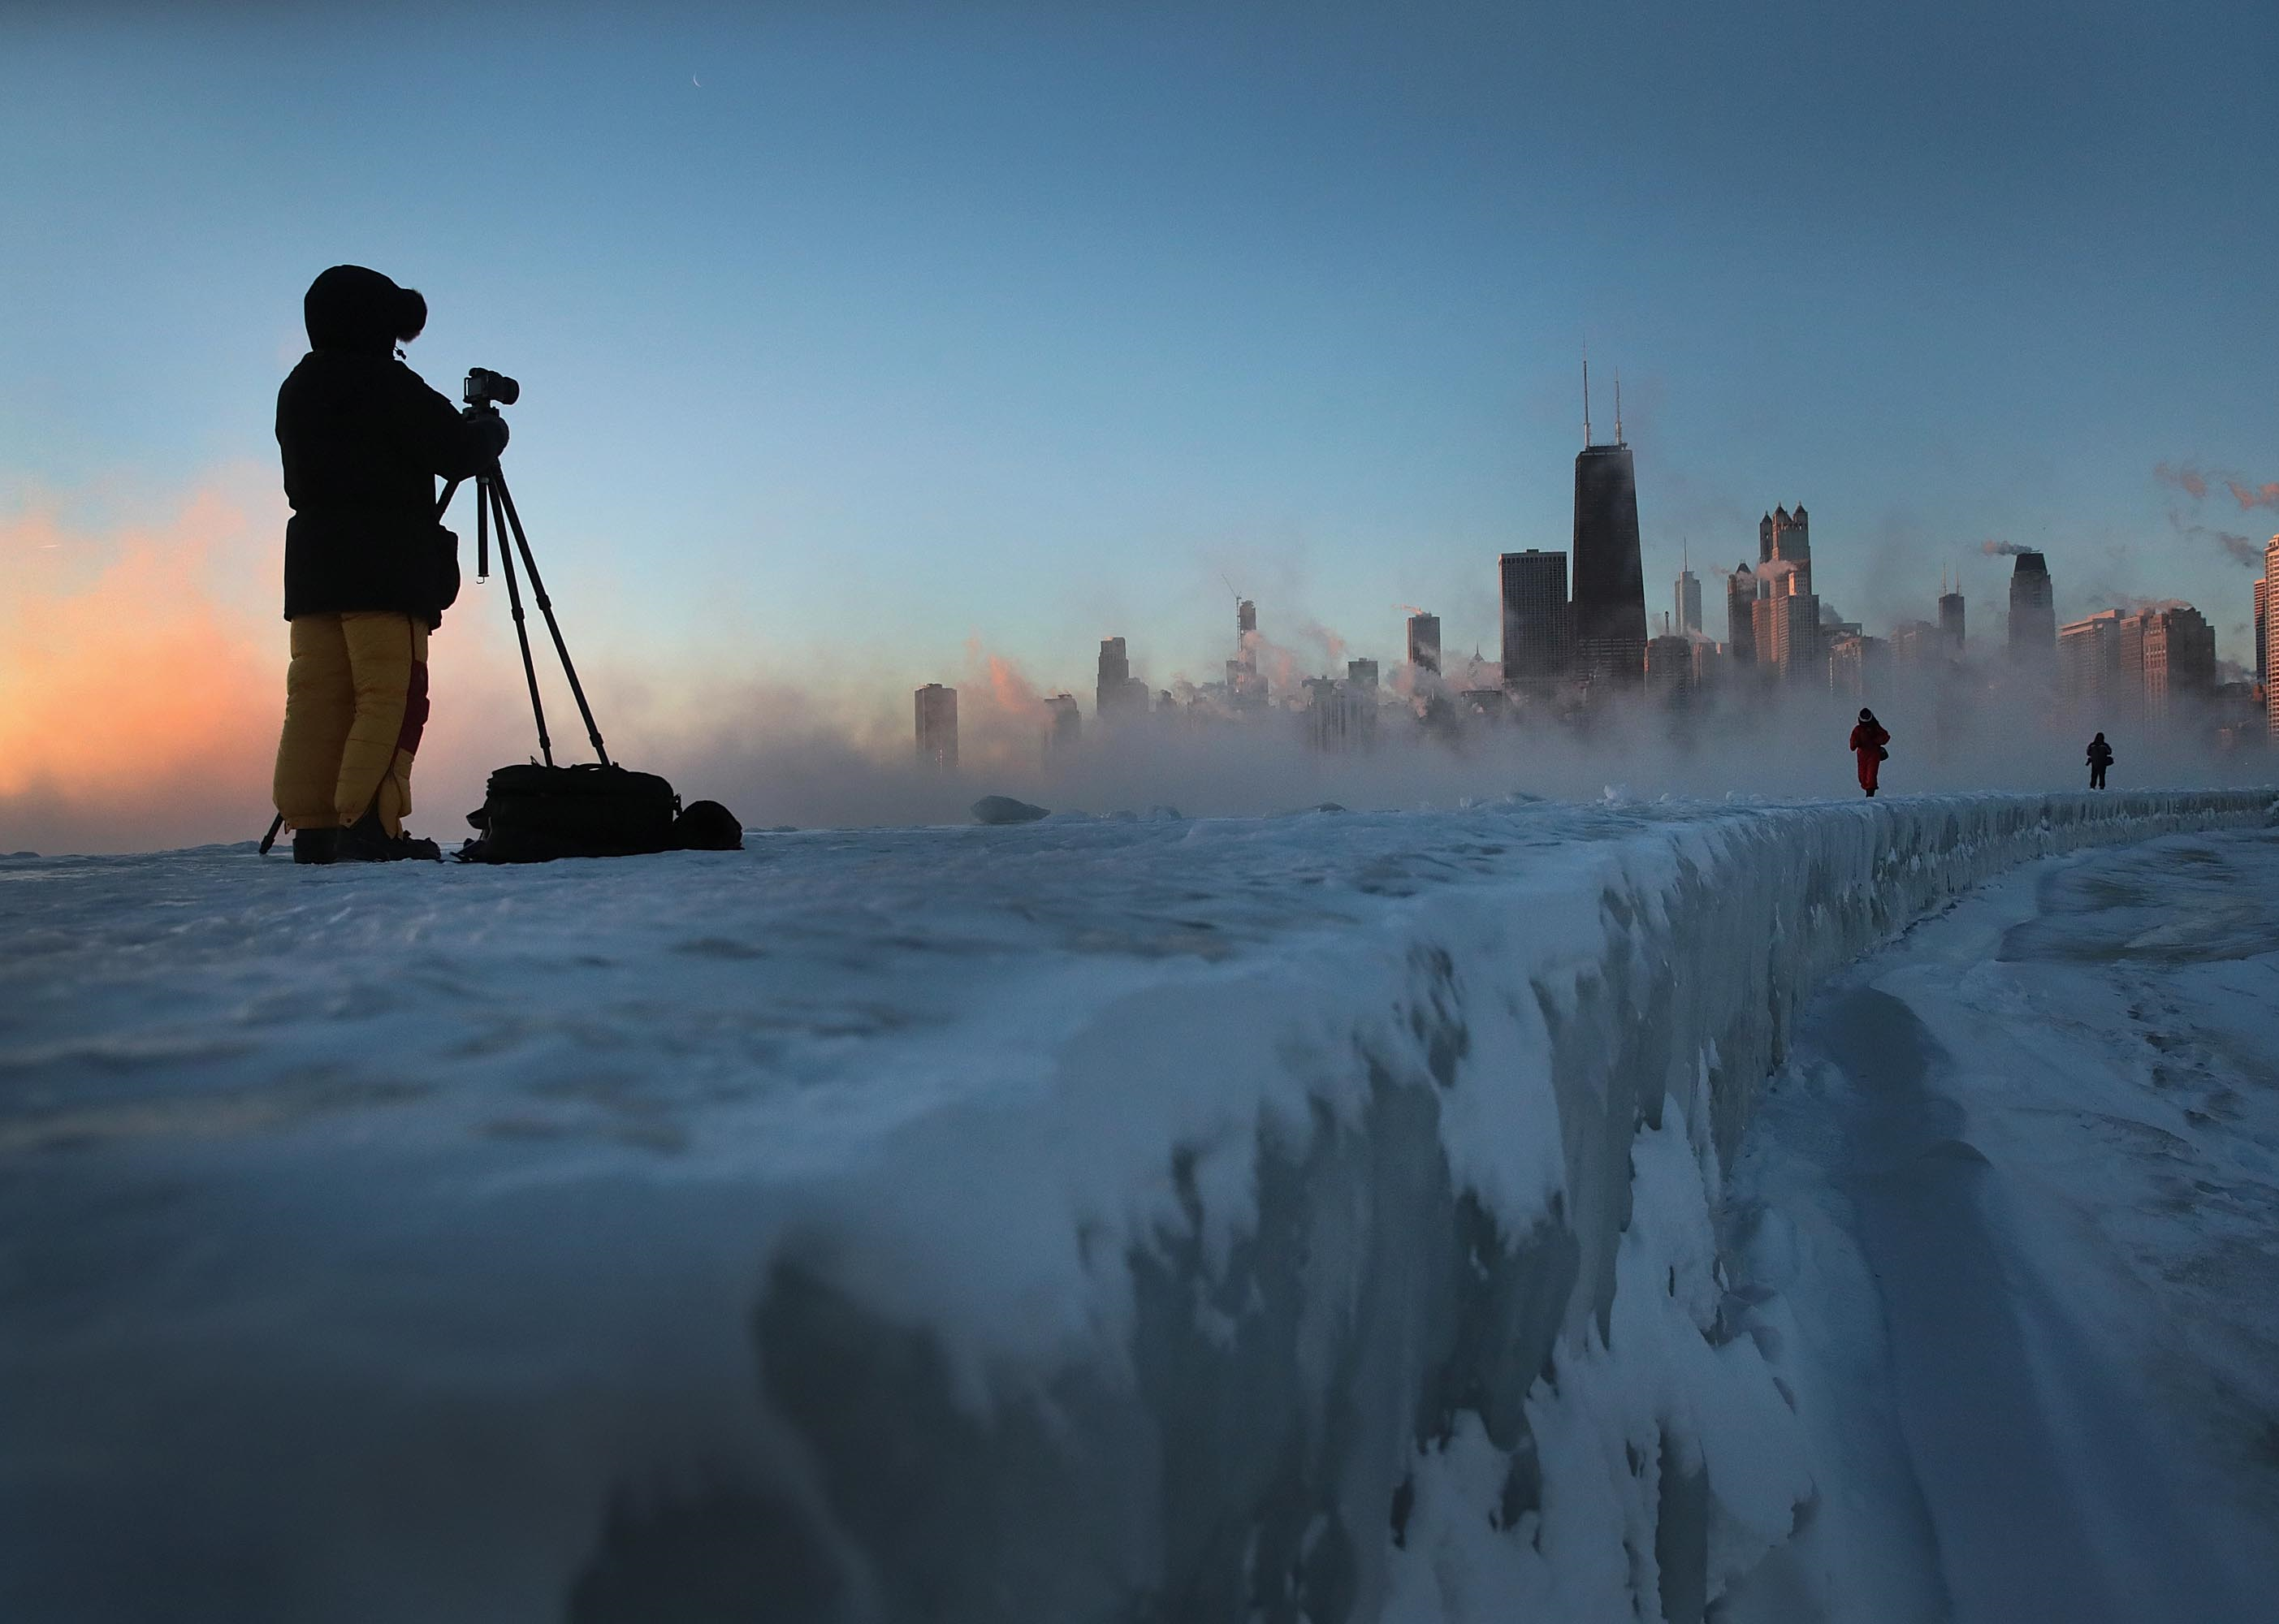 A photographer standing on the ice trying to take a picture of the sunrise over downtown Chicago.